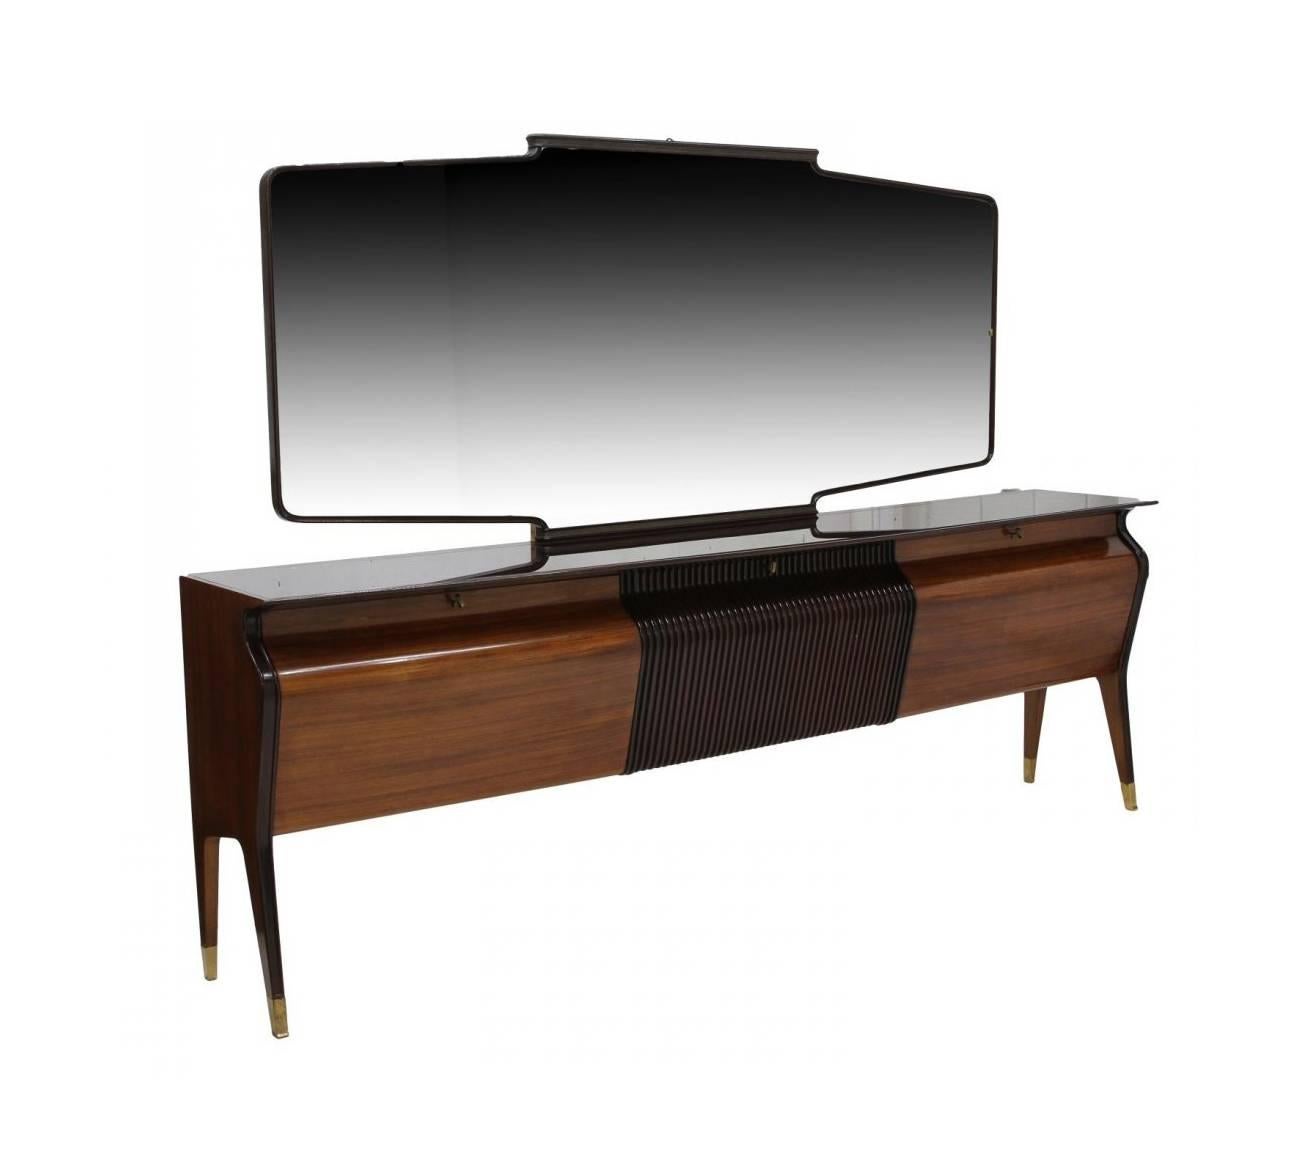 A large and impressive sideboard or credenza with a matching mirror, circa 1950s designed by Osvaldo Borsani (1911-1985). The sideboard is made of rosewood in contrast with ebonized central panel. It features an inset glass top and a large, shaped